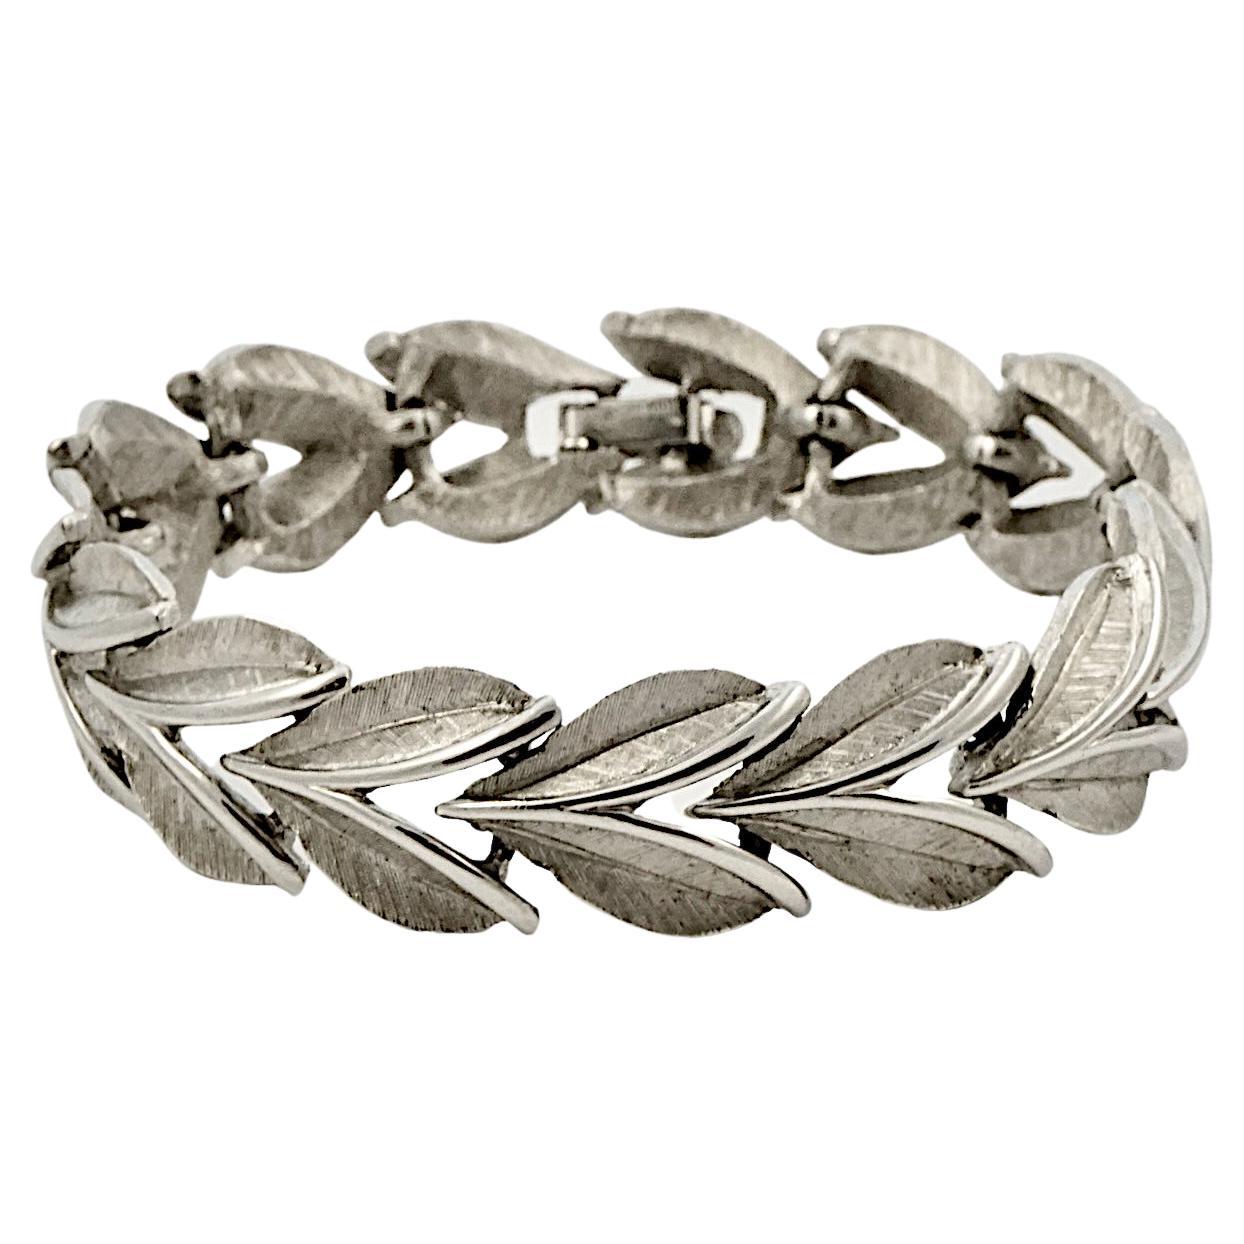 Trifari Silver Plated Brushed and Shiny Leaves Link Bracelet circa 1960s